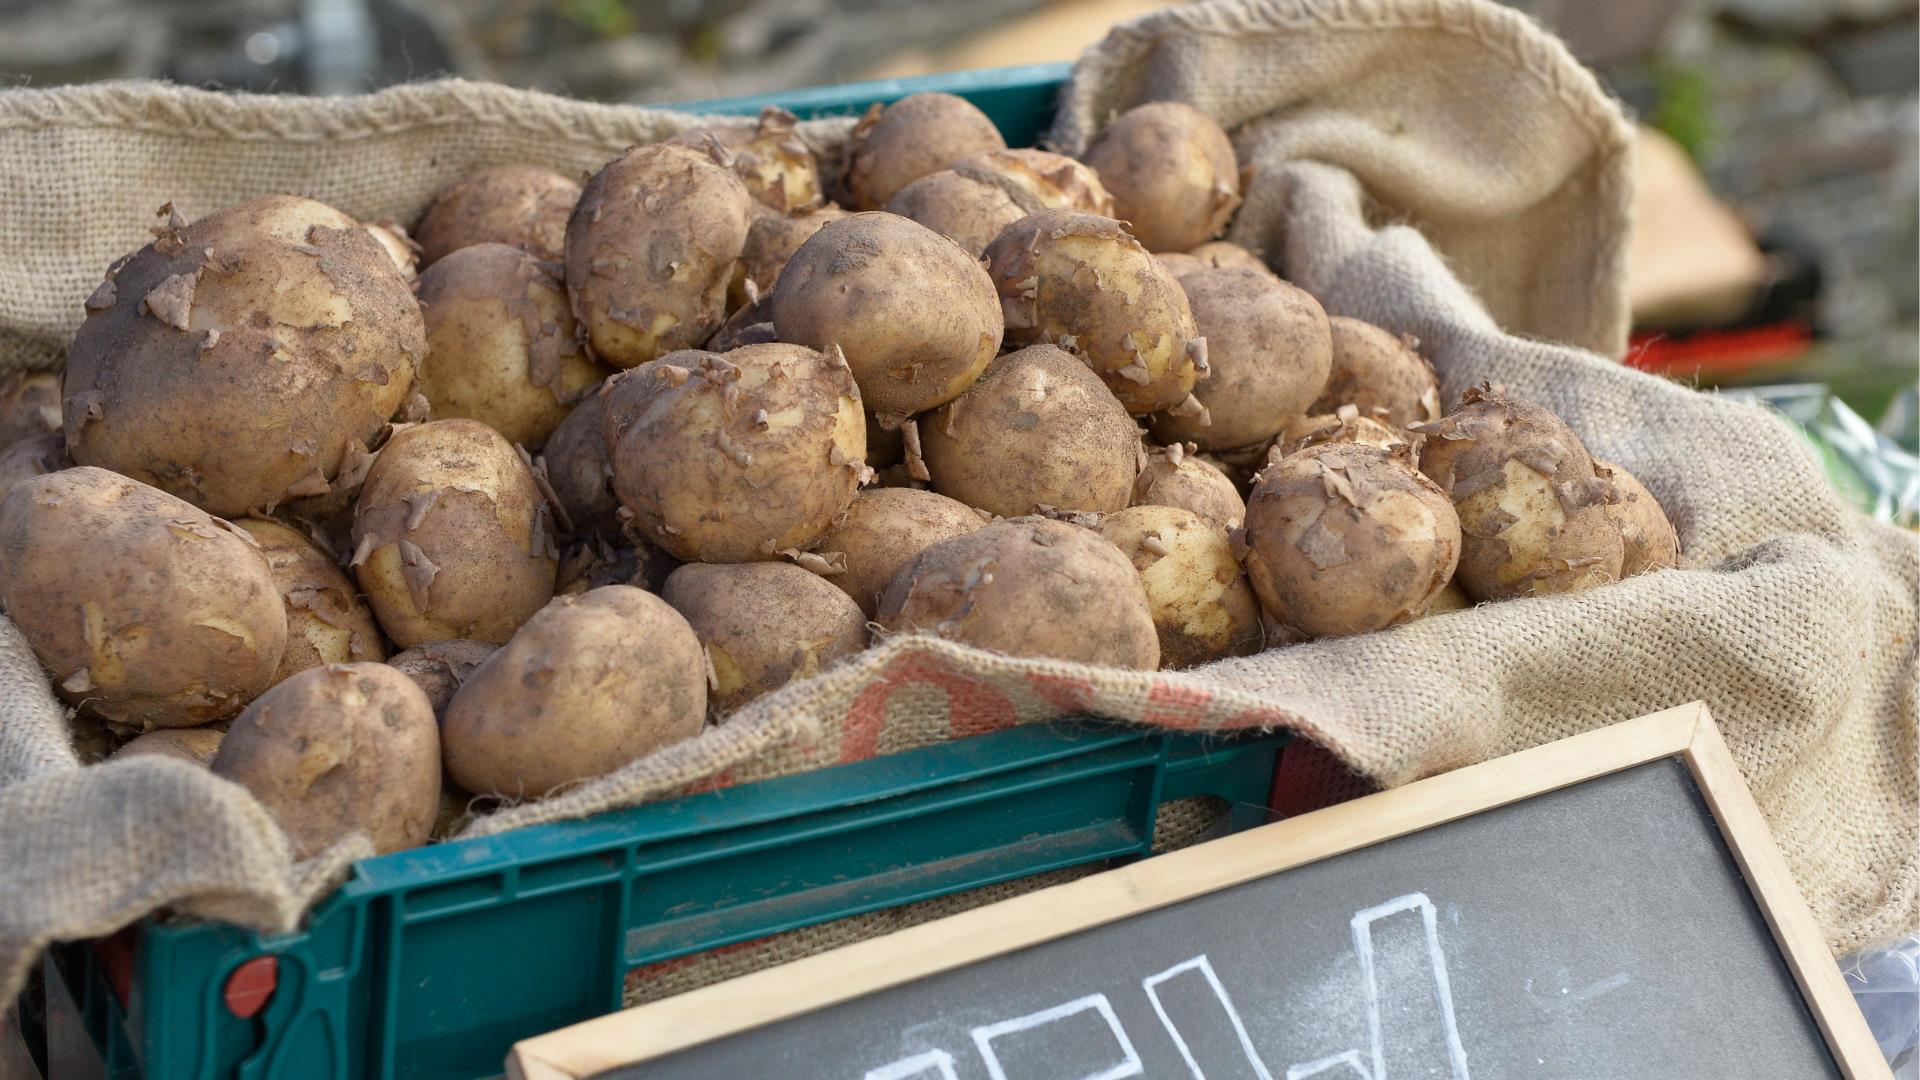 Image shows a potato stall at the market